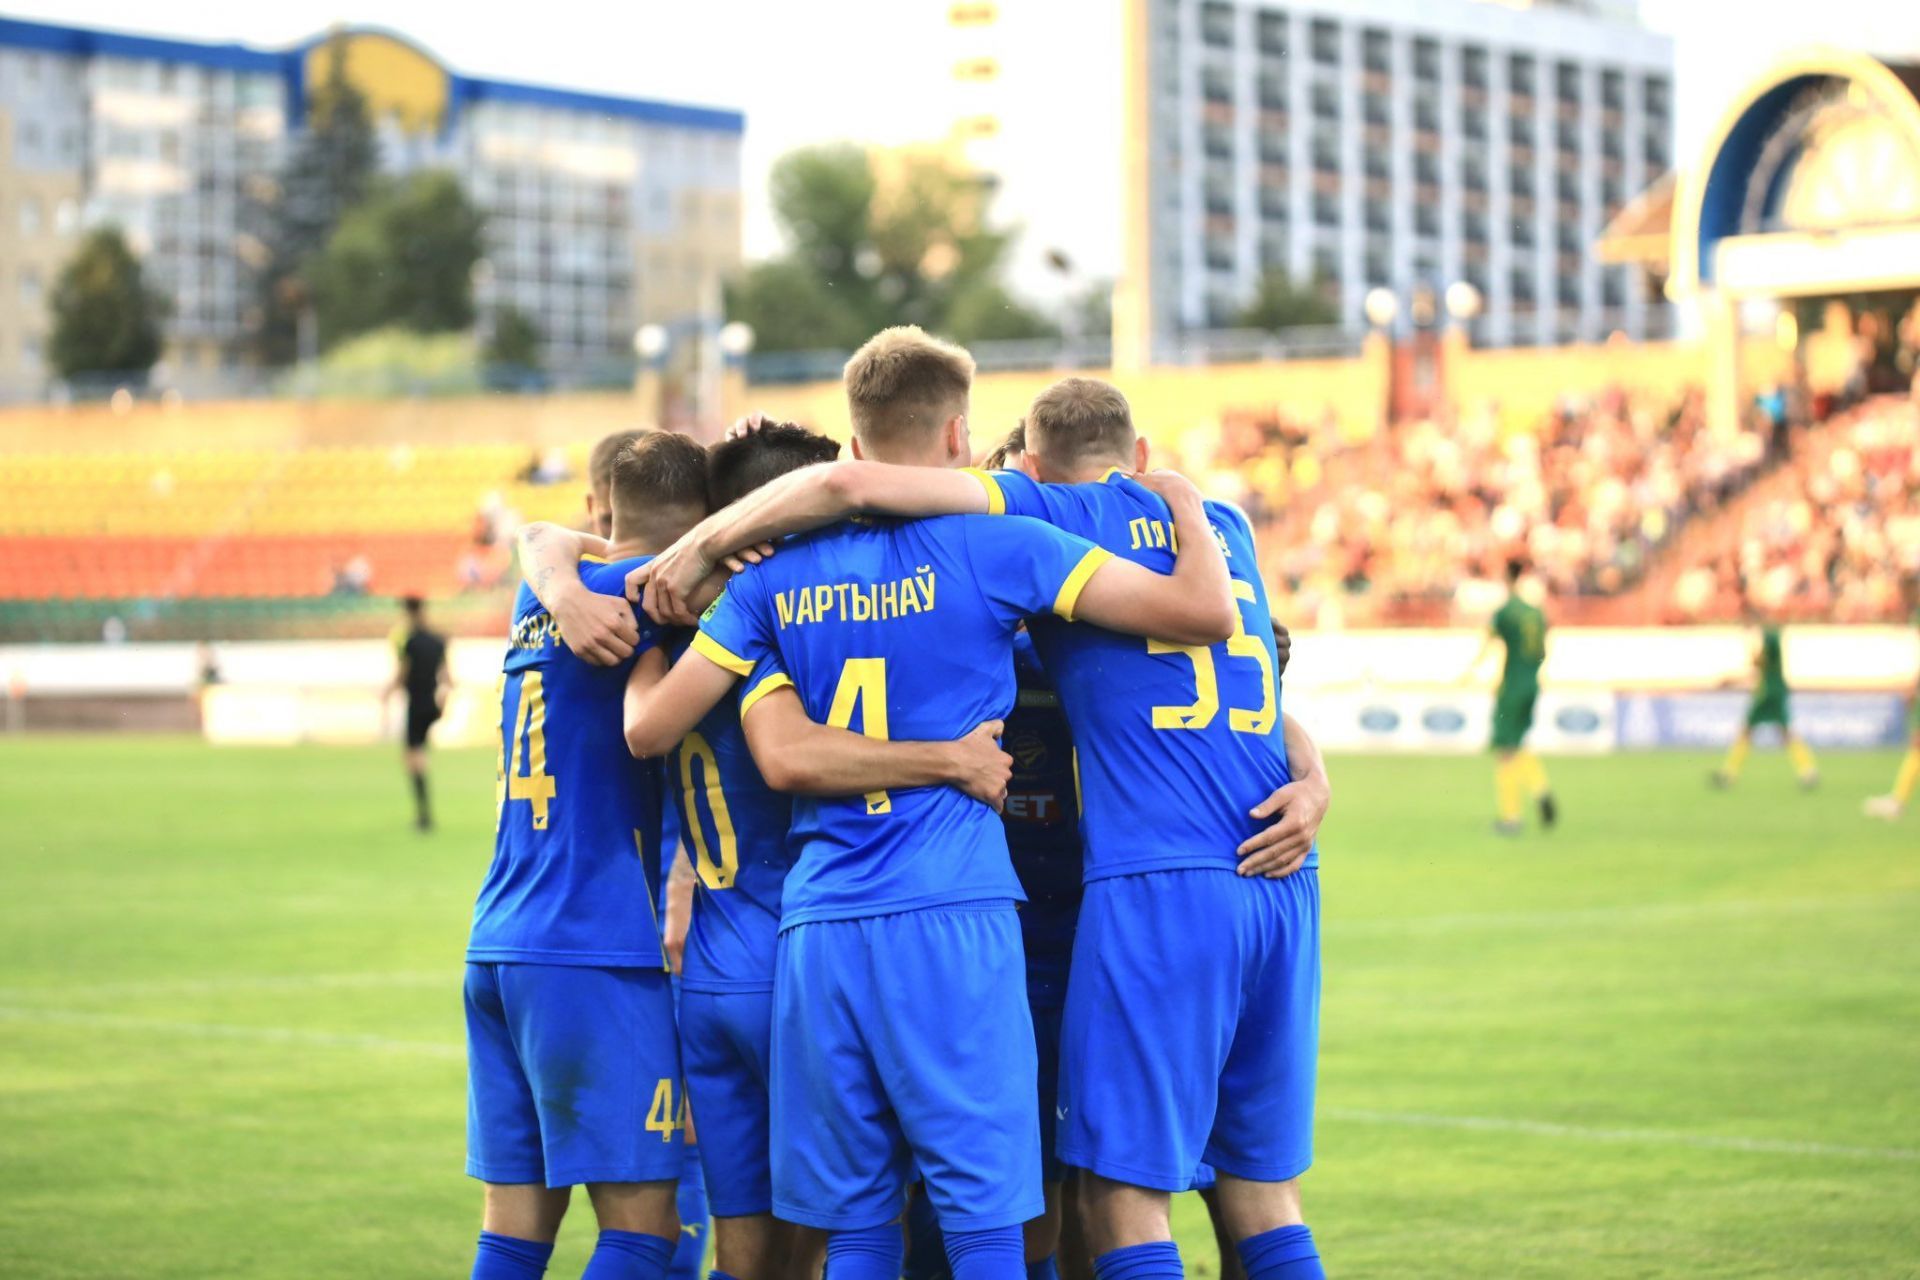 Bate Borisov face Partizani in the UEFA Champions League qualifiers on Tuesday